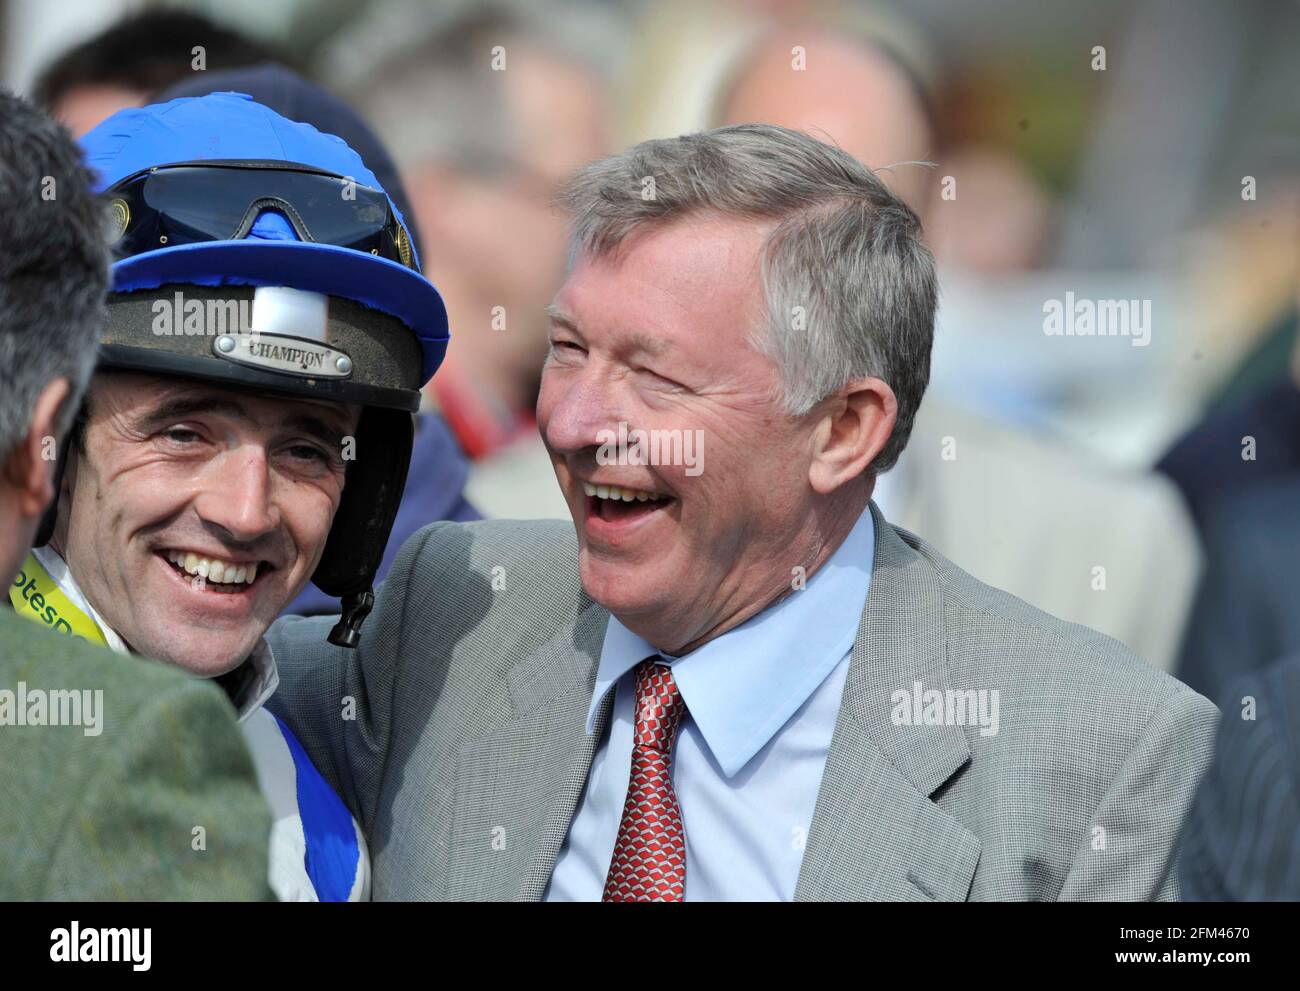 RACING AT AINTREE. 8/4/2010. THE TOTESPORT BOWL CHASE. WINNER RUBY WALSH ON WHAT A FRIEND with owner sir alex ferguson. . PICTURE DAVID ASHDOWN Stock Photo